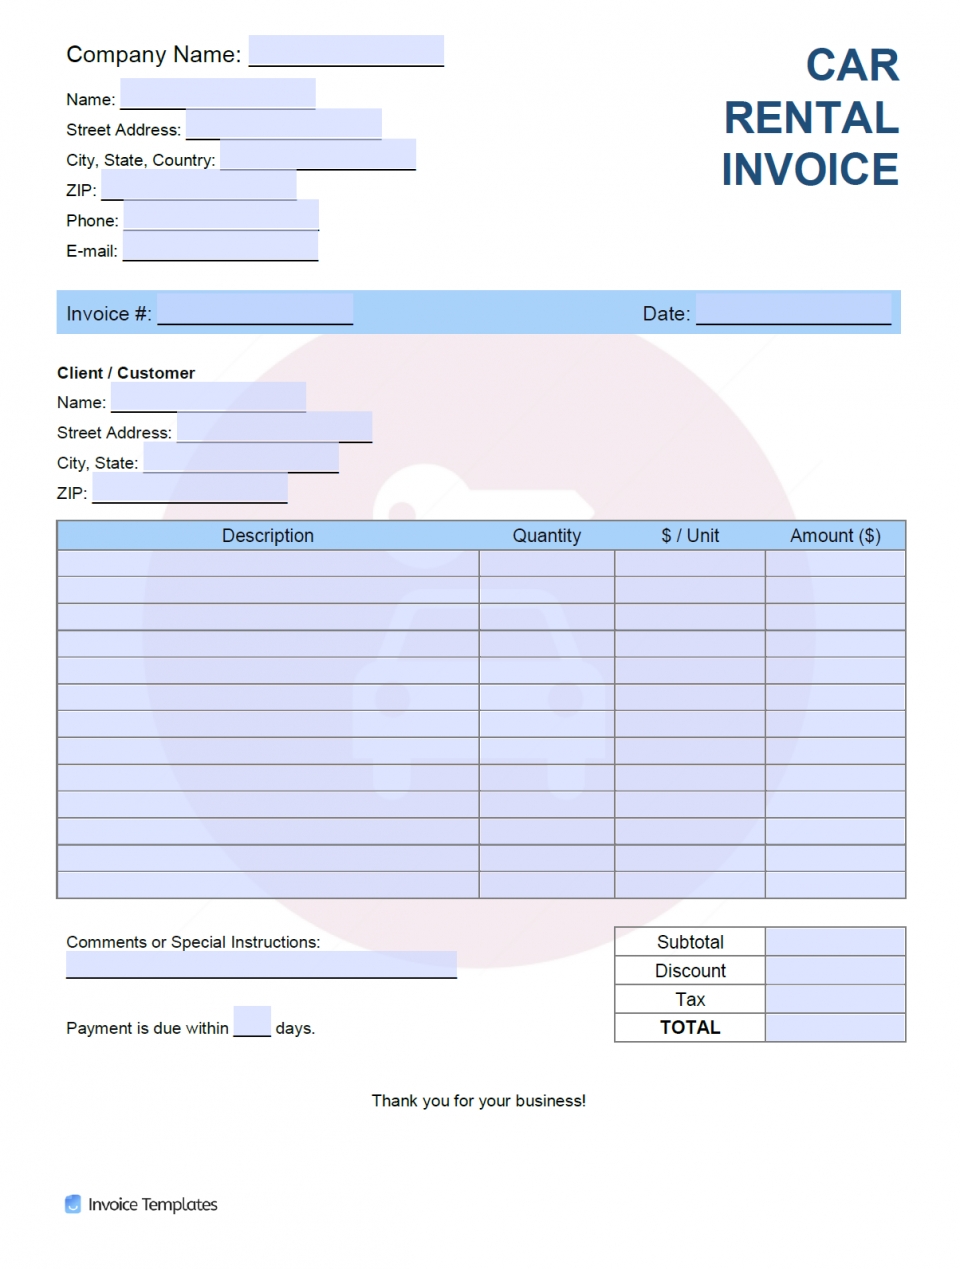 023 free car rental invoice template word excel for micr car rental services invoices